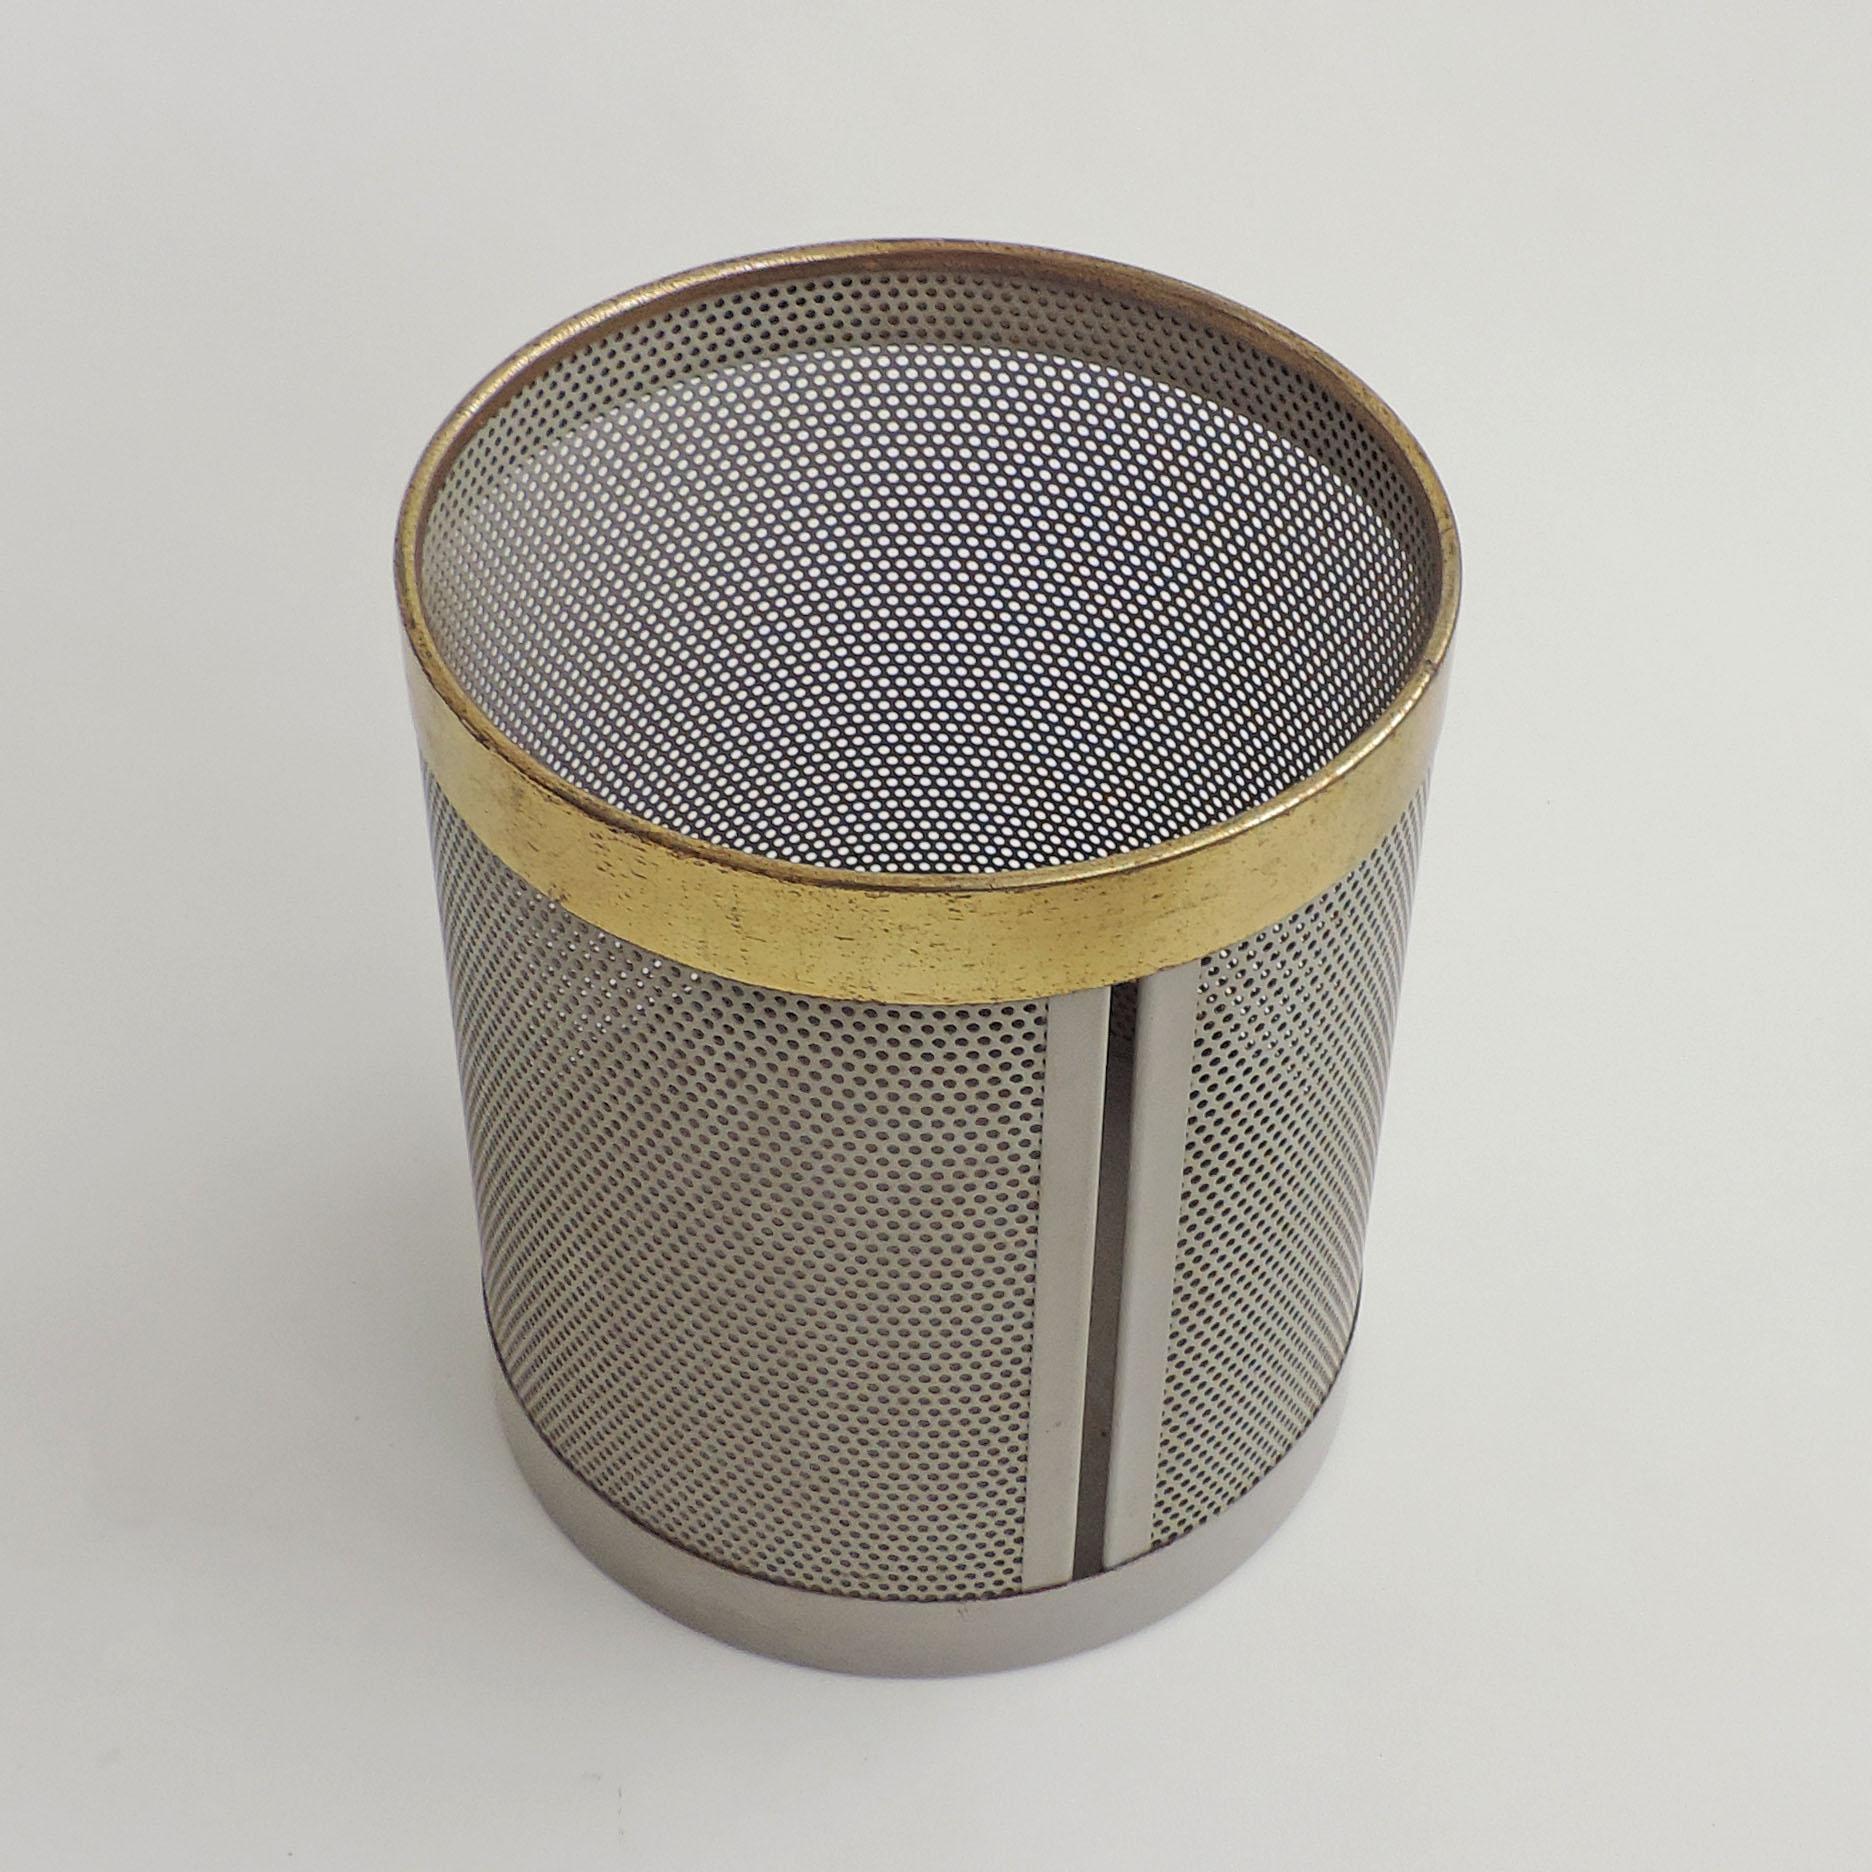 Lacquered Modernist Perforated Italian Wastepaper Bin in Grey Metal and Brass, Italy 1960s For Sale